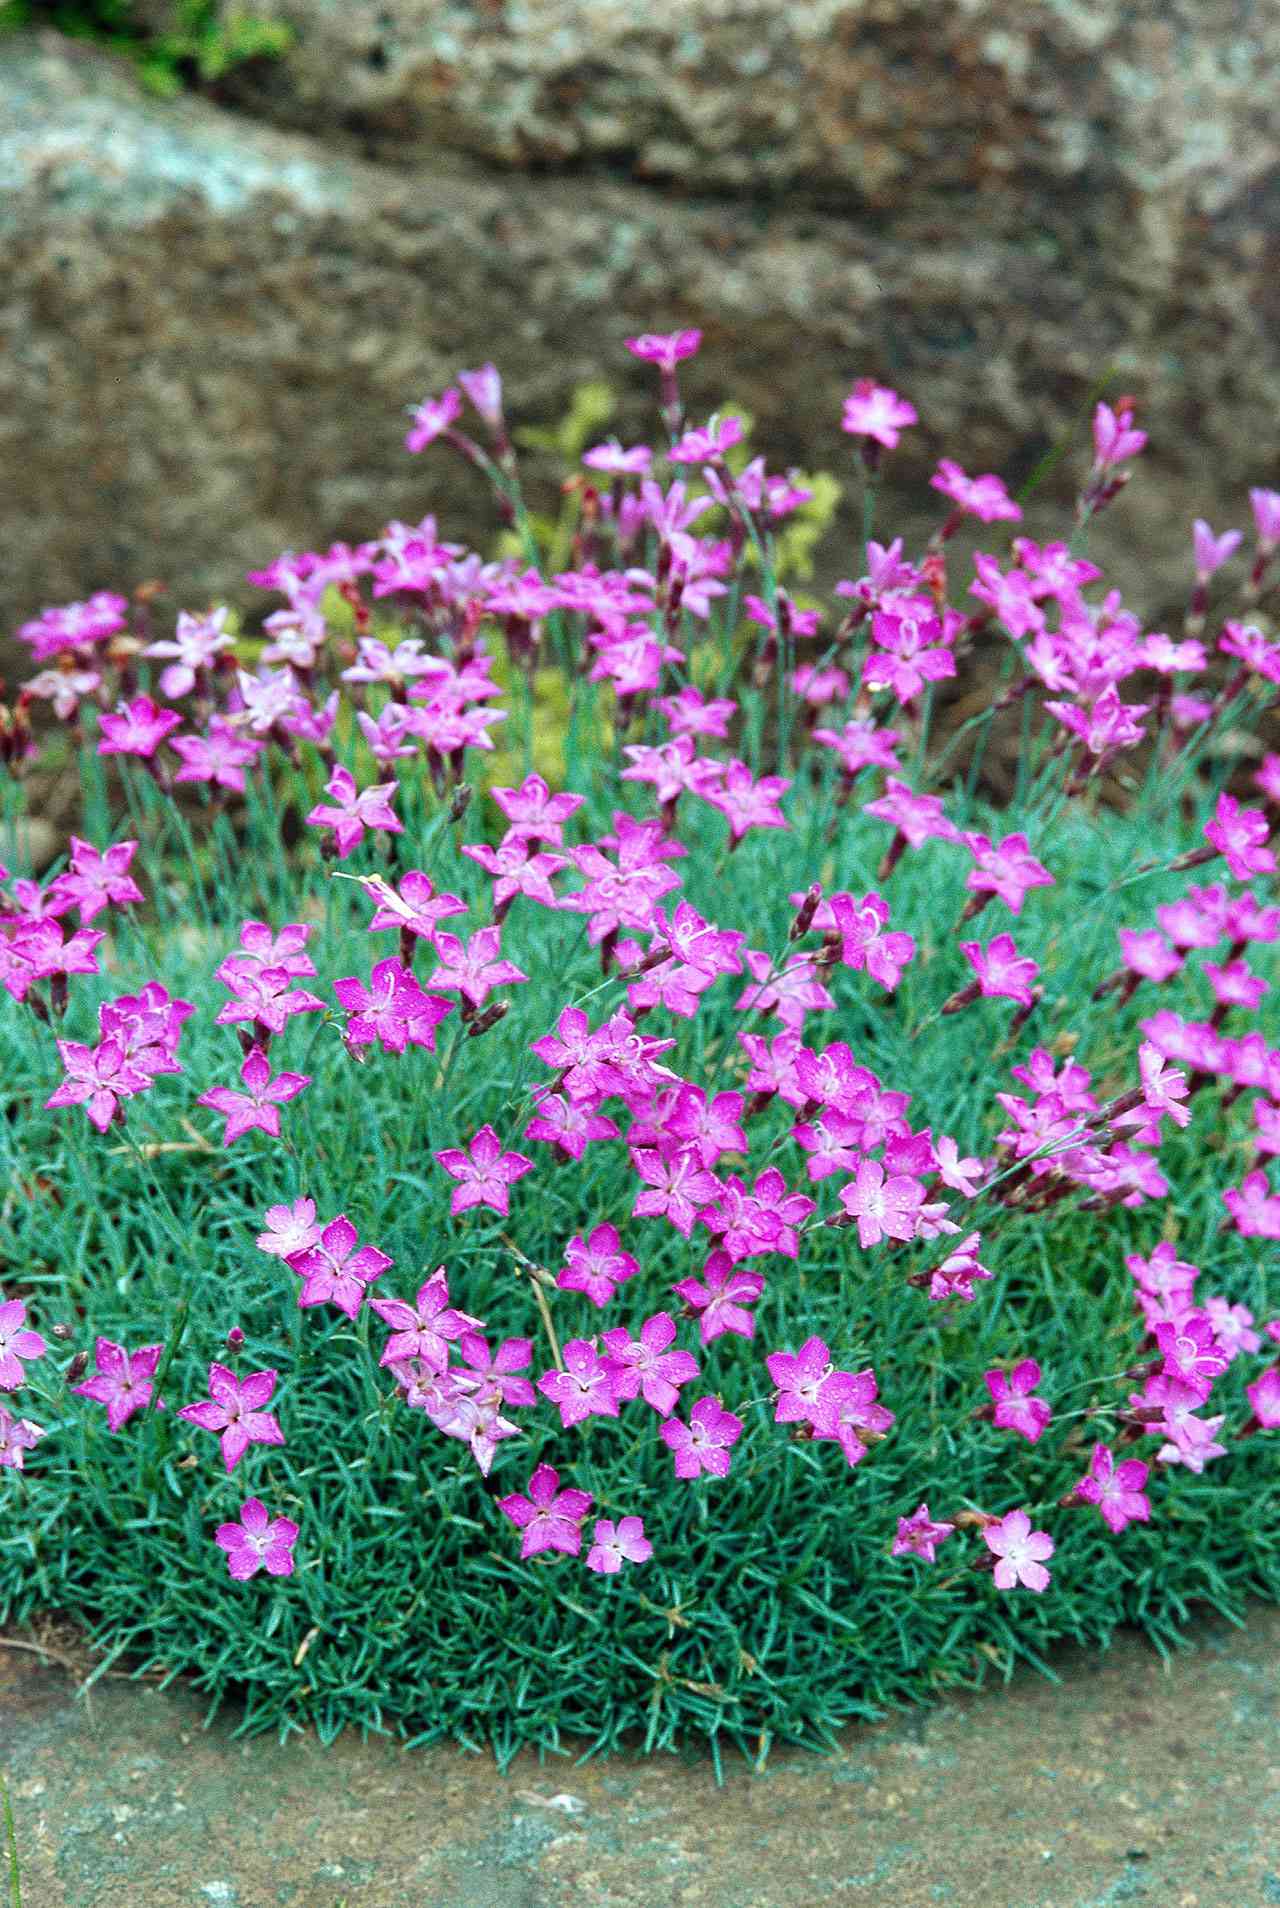 Drought Tolerant Groundcovers Better, Ground Cover For Rocky Slope